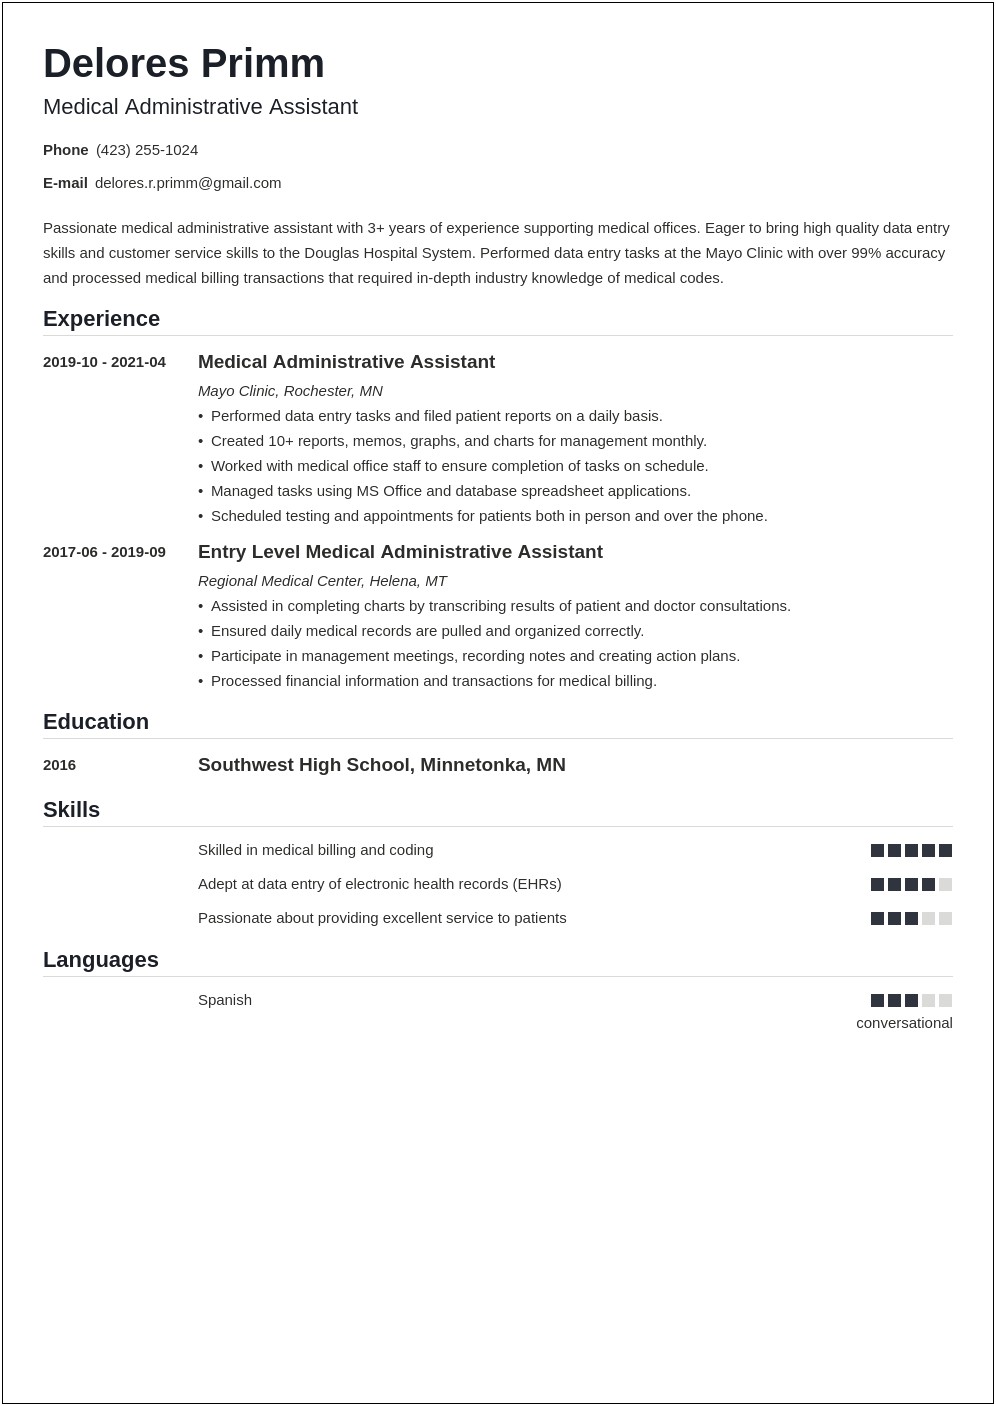 Entry Level Health Service Management Resume Examples